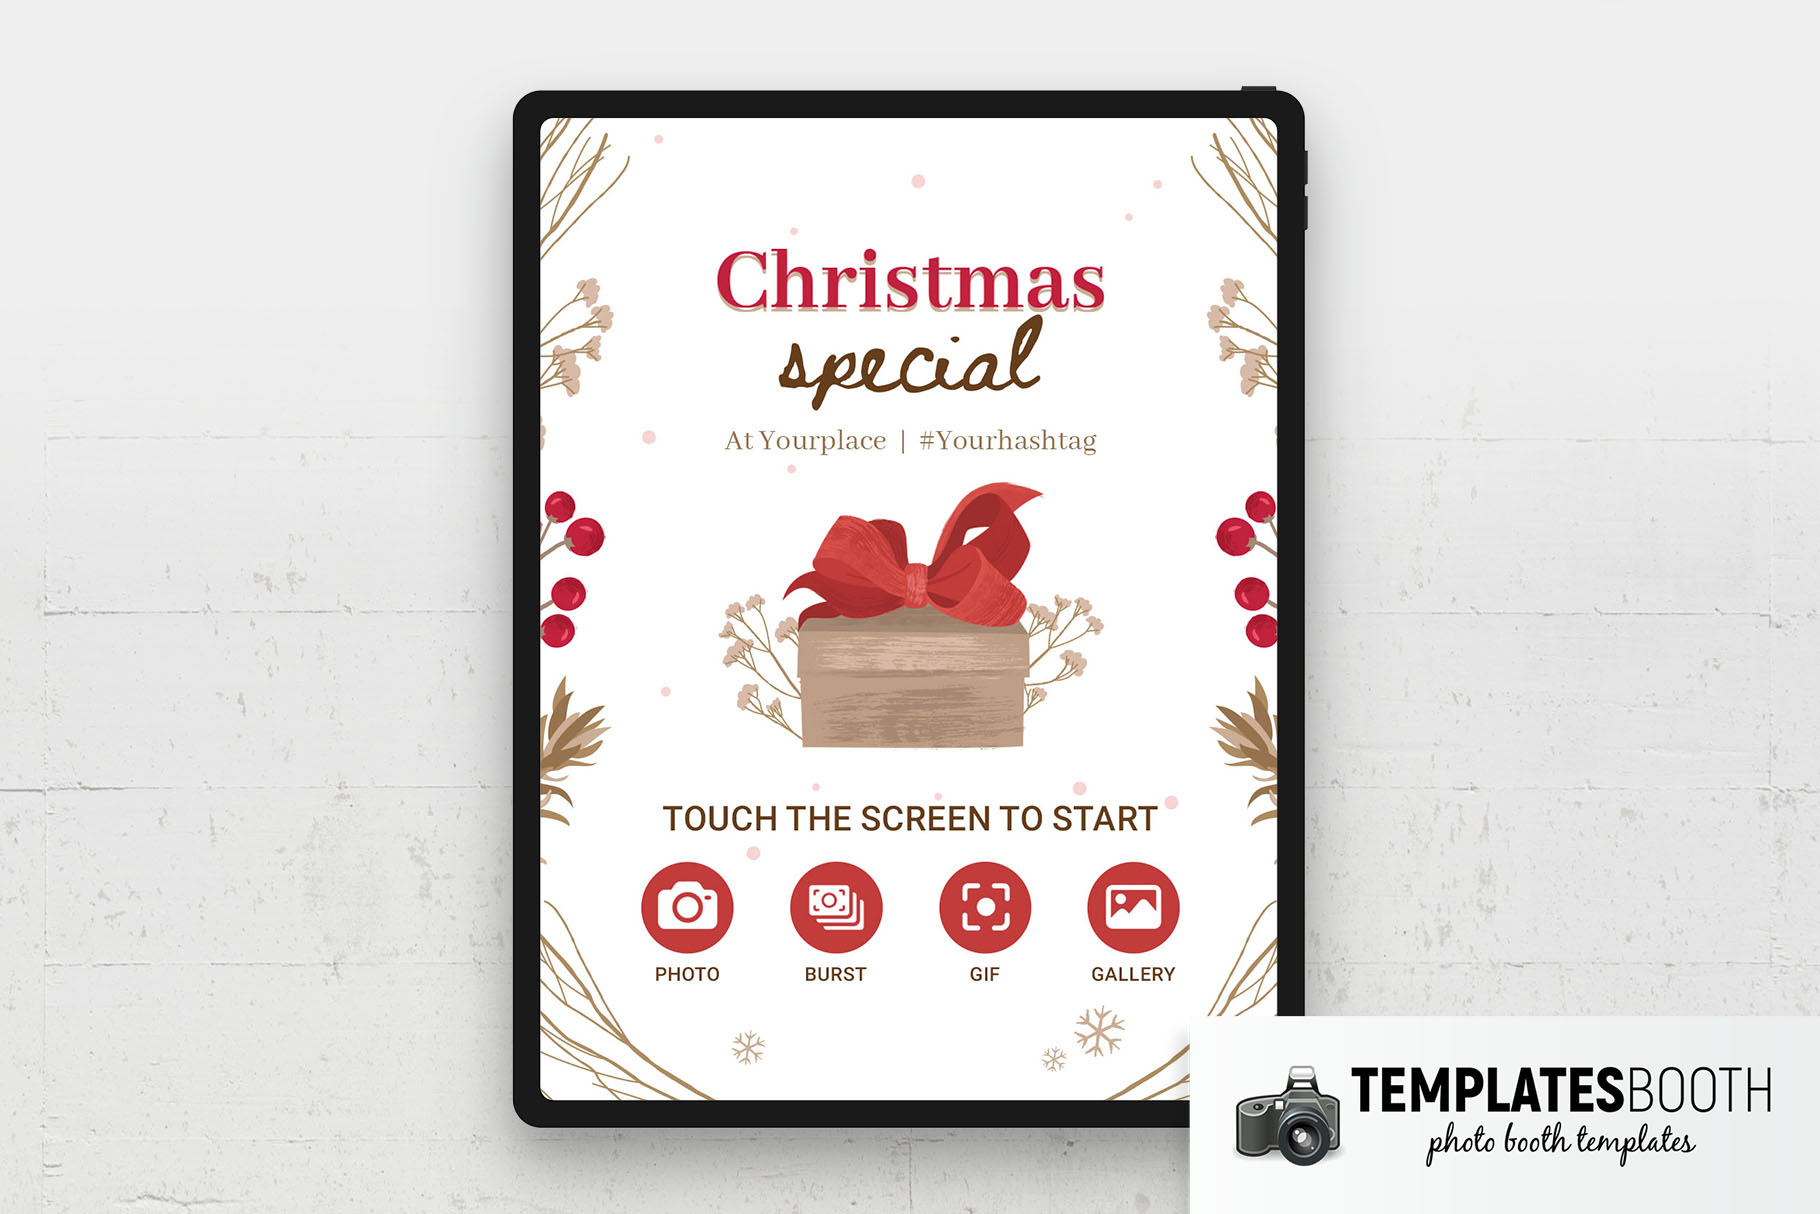 Rustic Christmas Photo Booth Welcome Screen